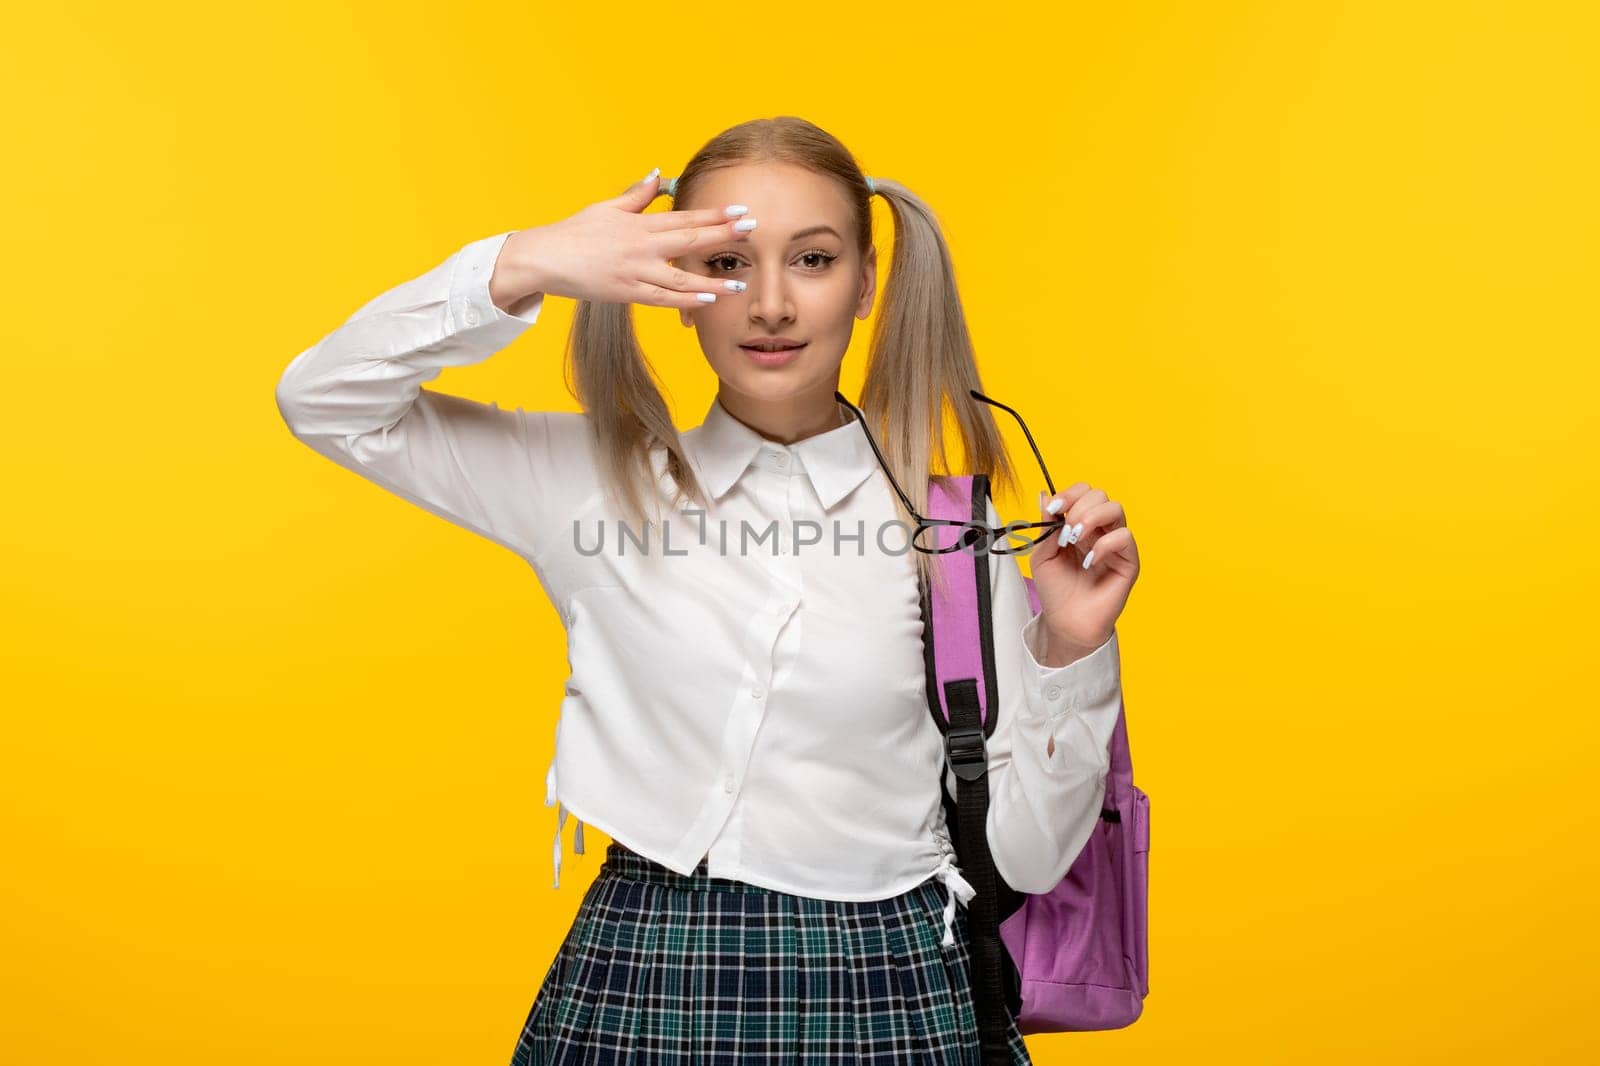 world book day young schoolgirl covering face with the hand on yellow background by Kamran